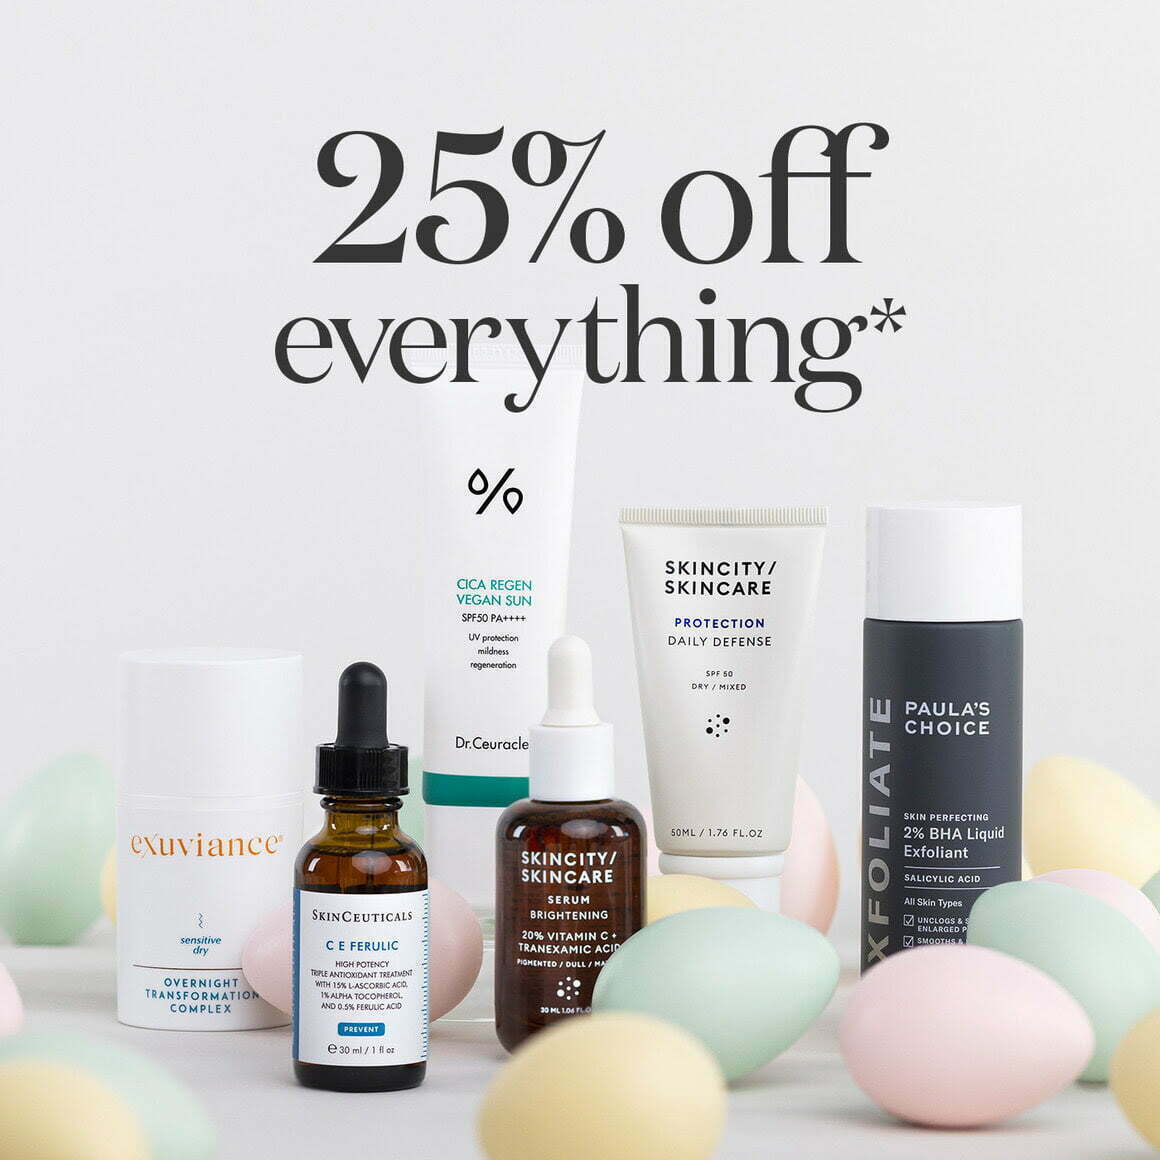 25% off sitewide at Skincity